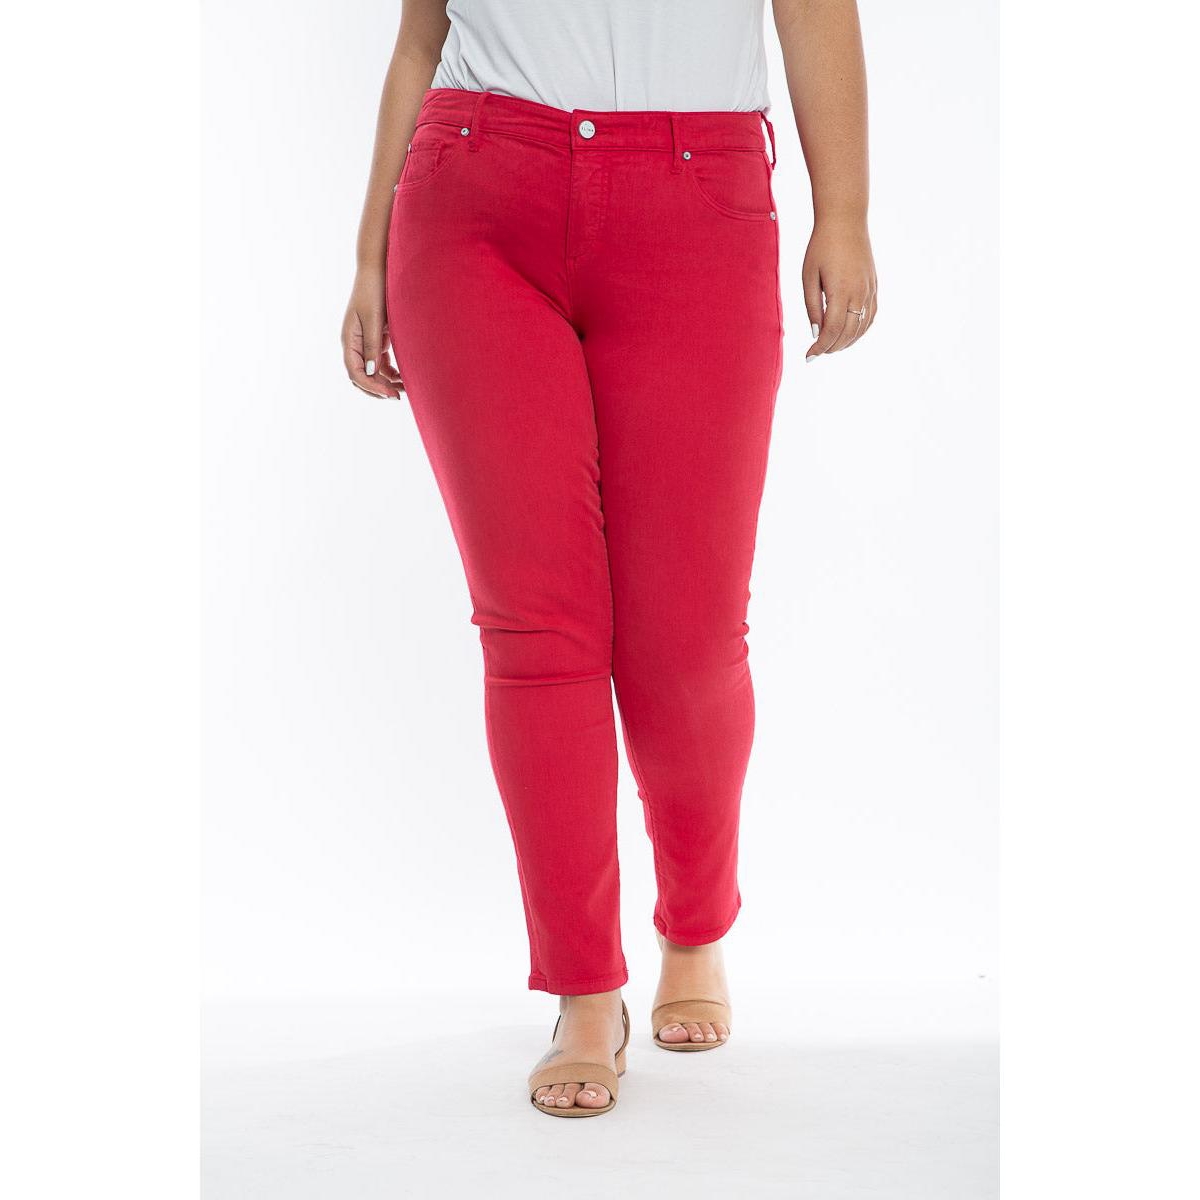 Women's Color Mid Rise Slim pants - Rose red